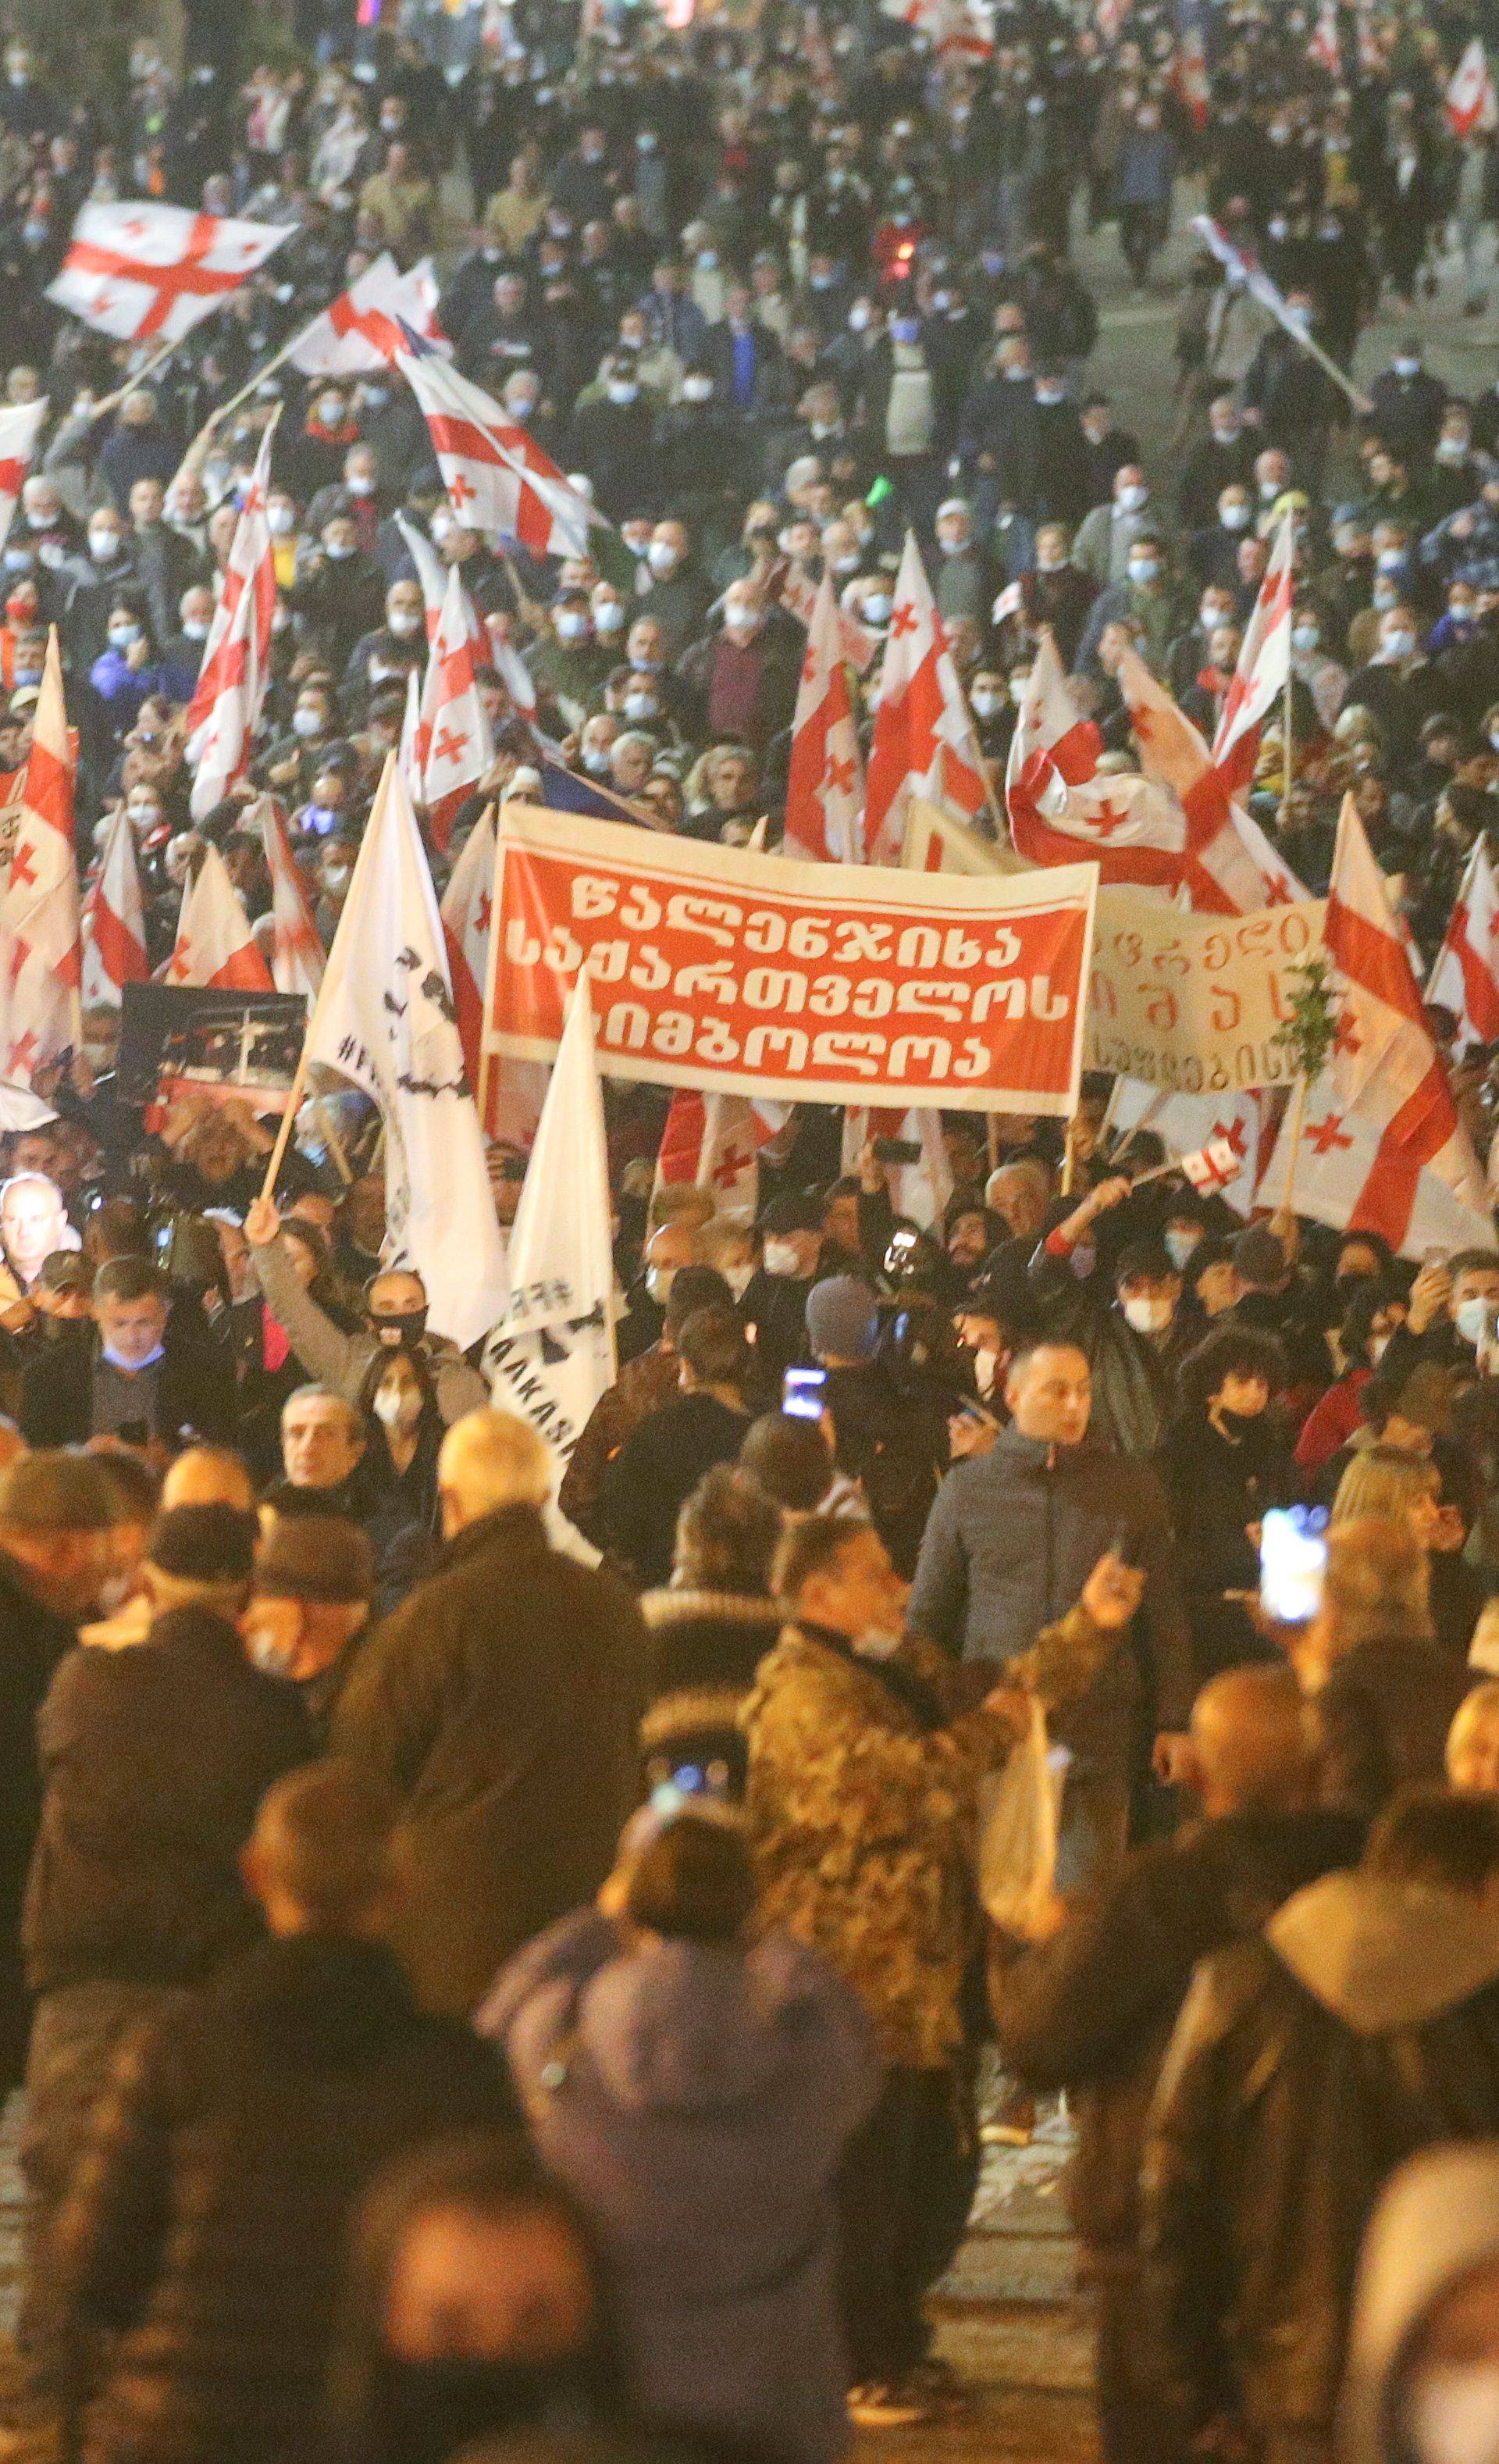 Georgian opposition supporters hold a rally in support of jailed ex-president Saakashvili in Tbilisi